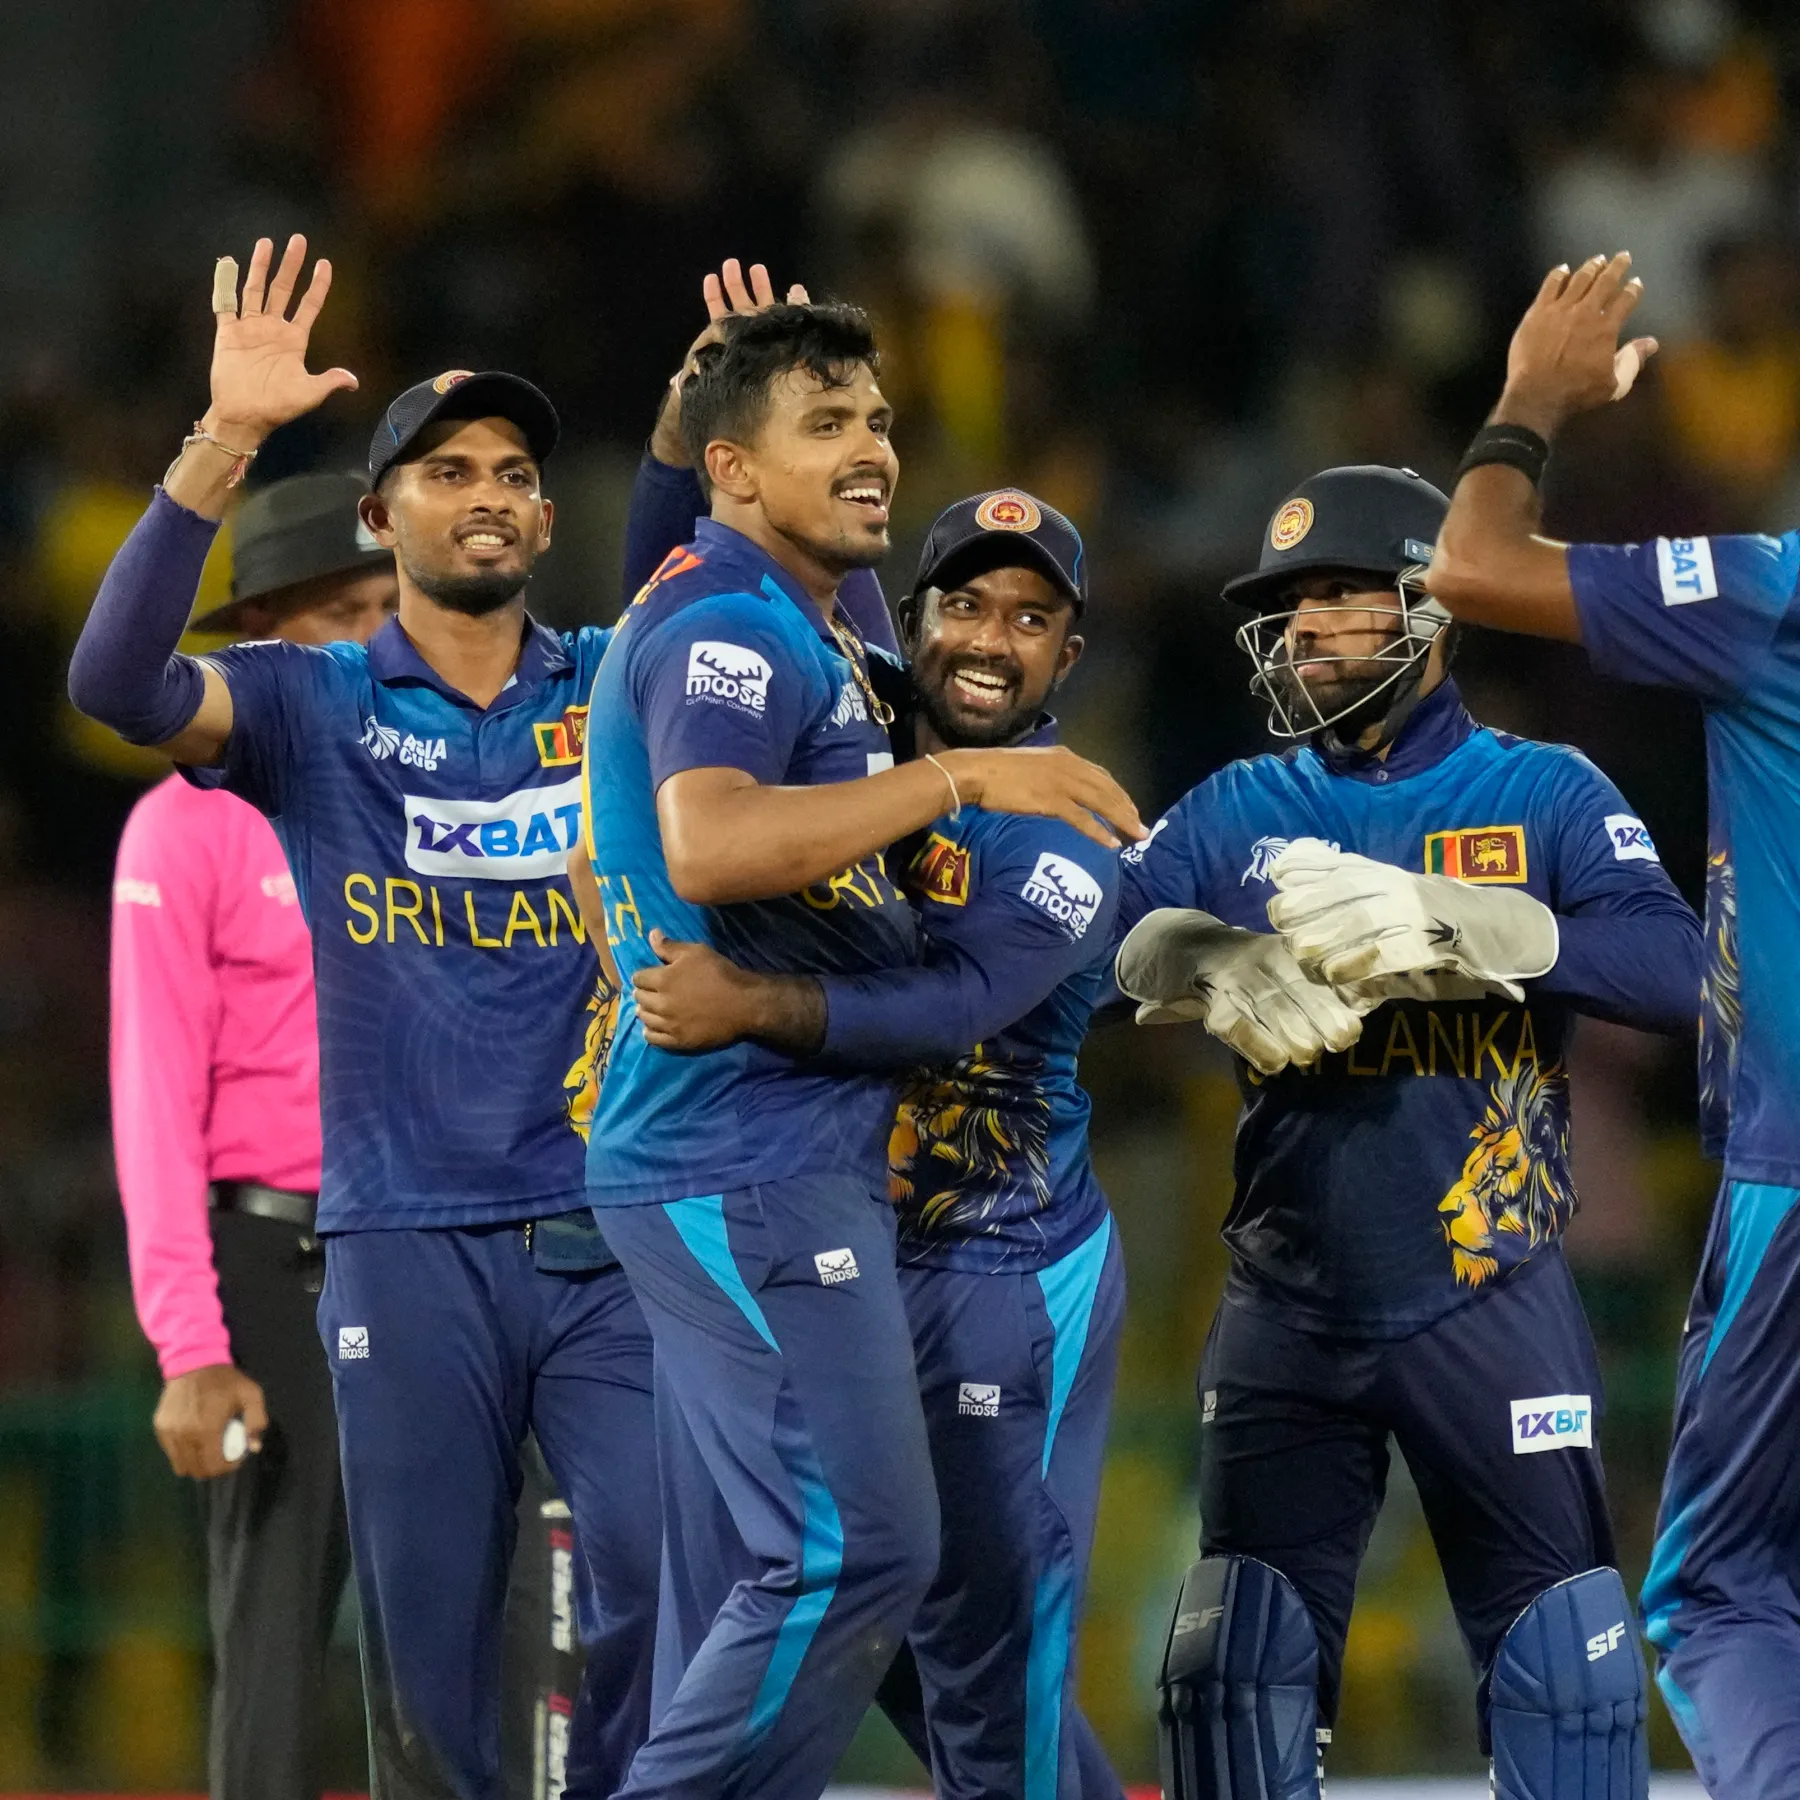 As Sri Lanka hosts the Asia Cup, cricket becomes a beacon of hope for a nation recovering from its worst economic crisis.